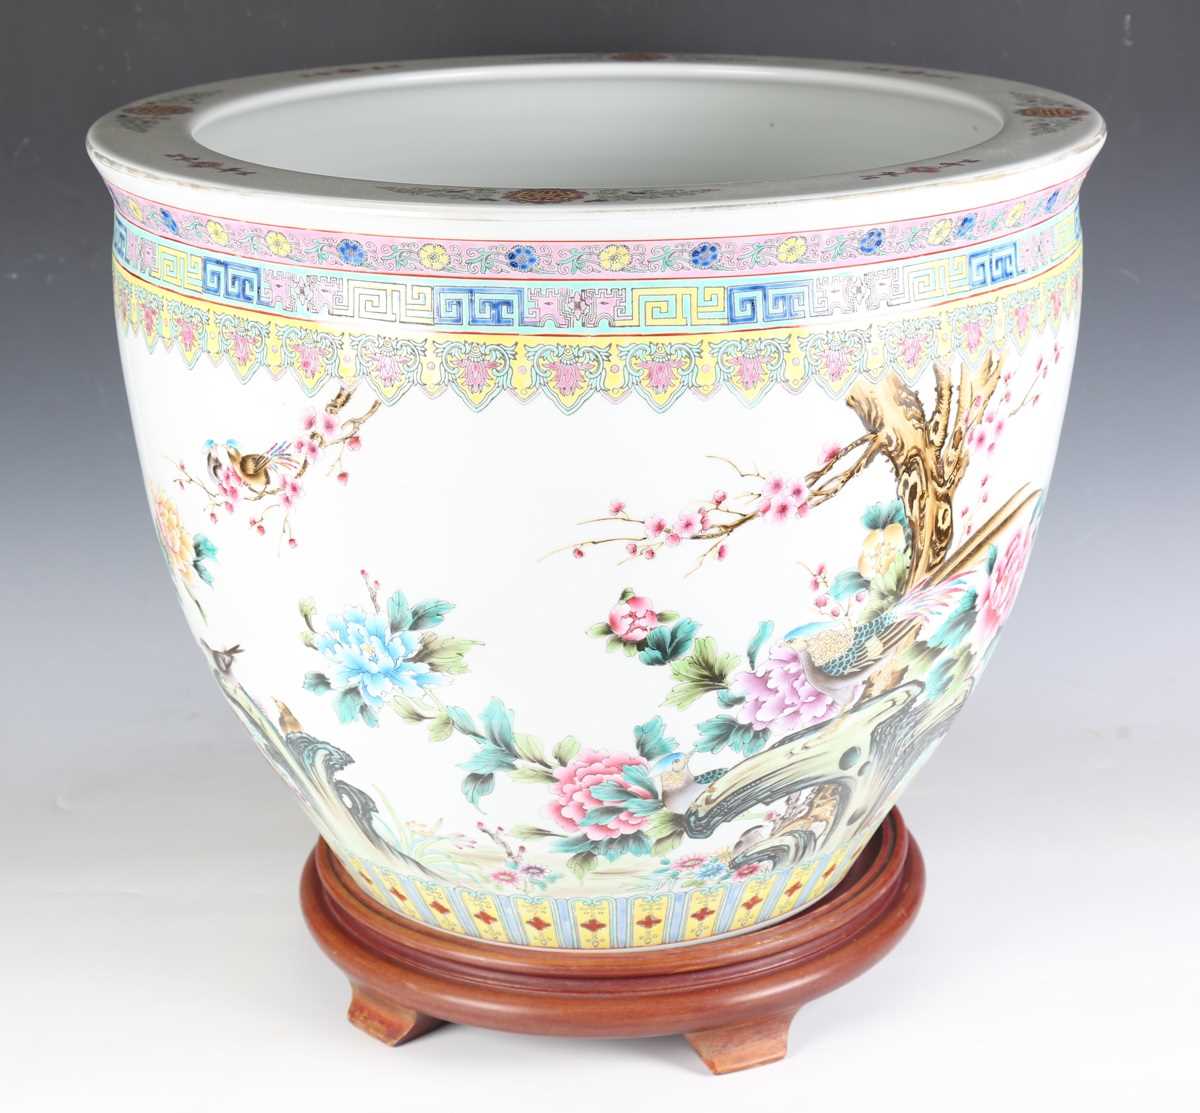 A large Chinese porcelain jardinière stand, painted with birds and flowers, height 44cm, diameter